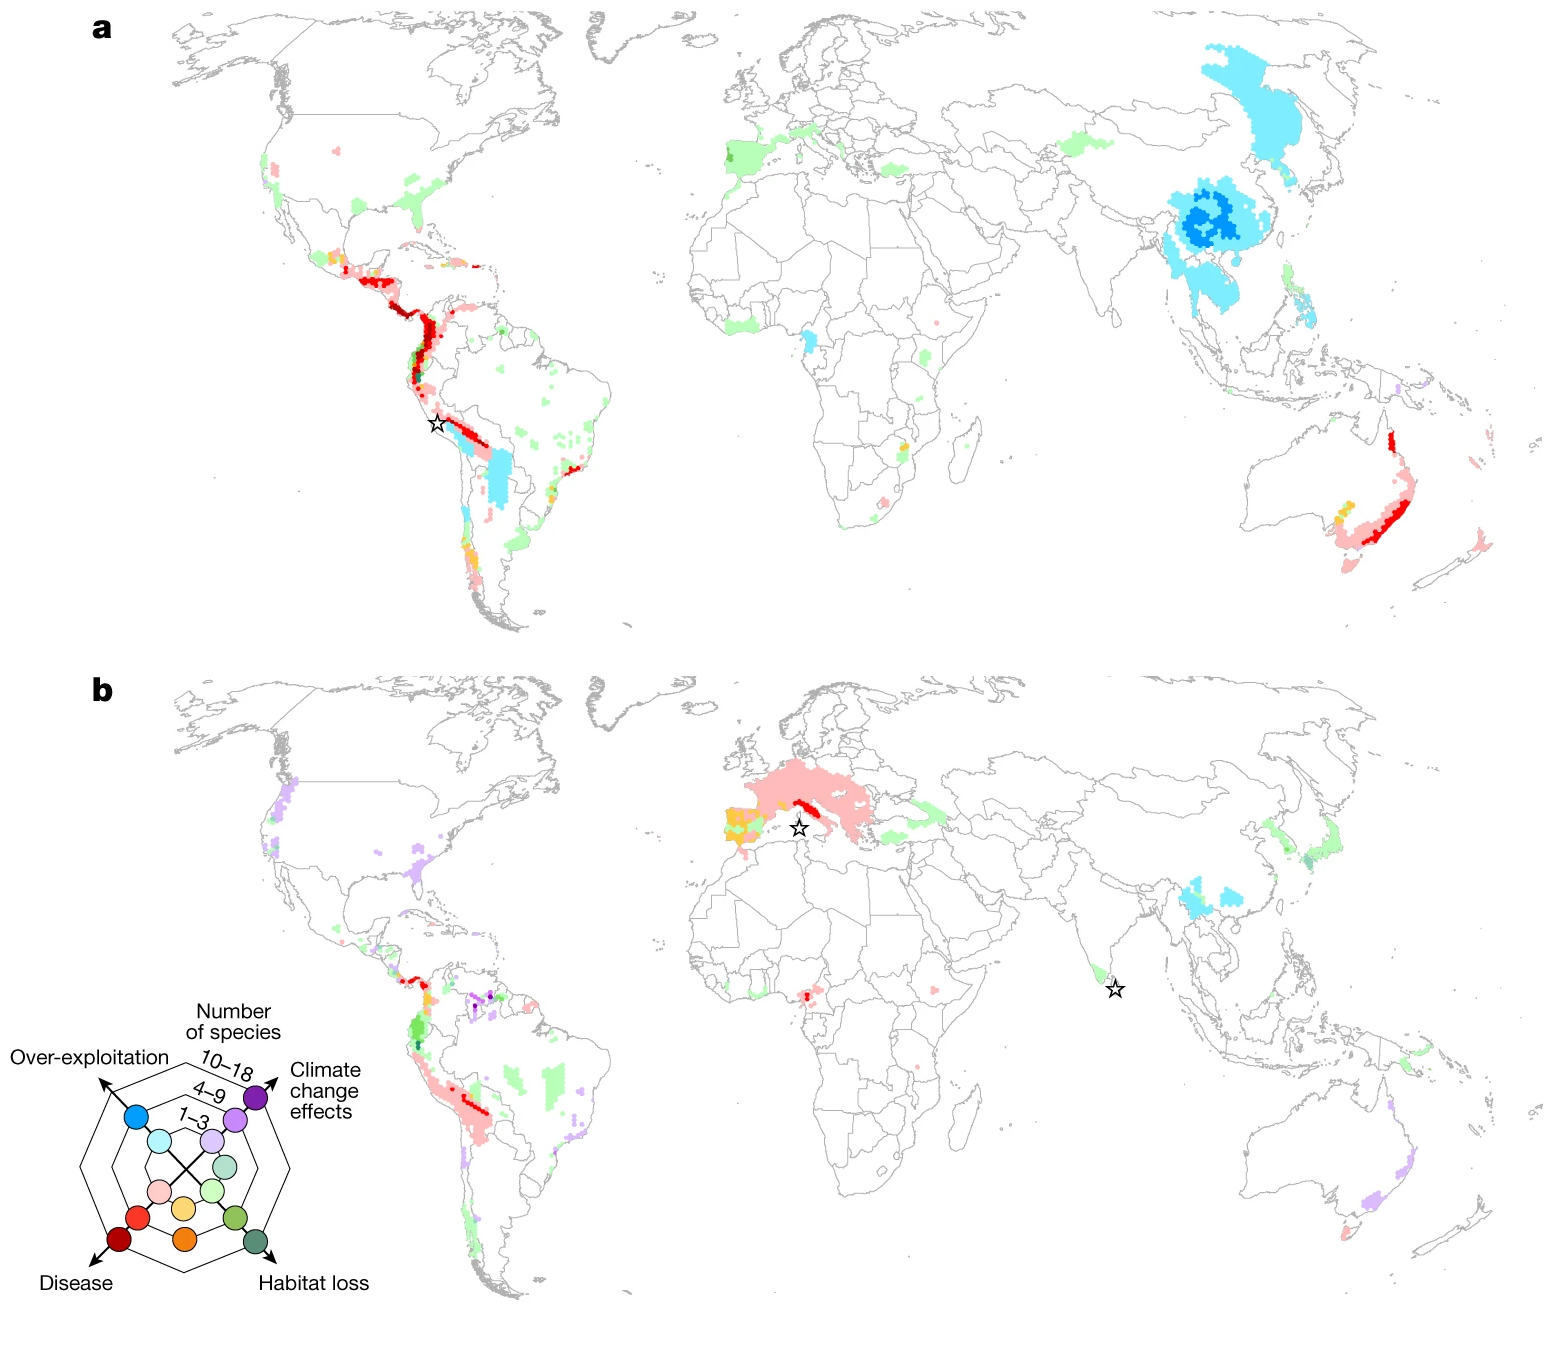 Geographical pattern of the primary drivers of deteriorating status among amphibians. a,b, The primary drivers of deteriorating status among amphibians during 1980–2004 (482 species; a) and 2004–2022 (306 species; b). Cell colour was determined by the primary driver impacting the most species. Where two primary drivers equally contribute to a cell, an intermediate colour is shown. The stars indicate where the primary driver is undetermined or there are numerous primary drivers. The cell area is 7,775 km2. Graphic: Luedtke, et al., 2023 / Nature